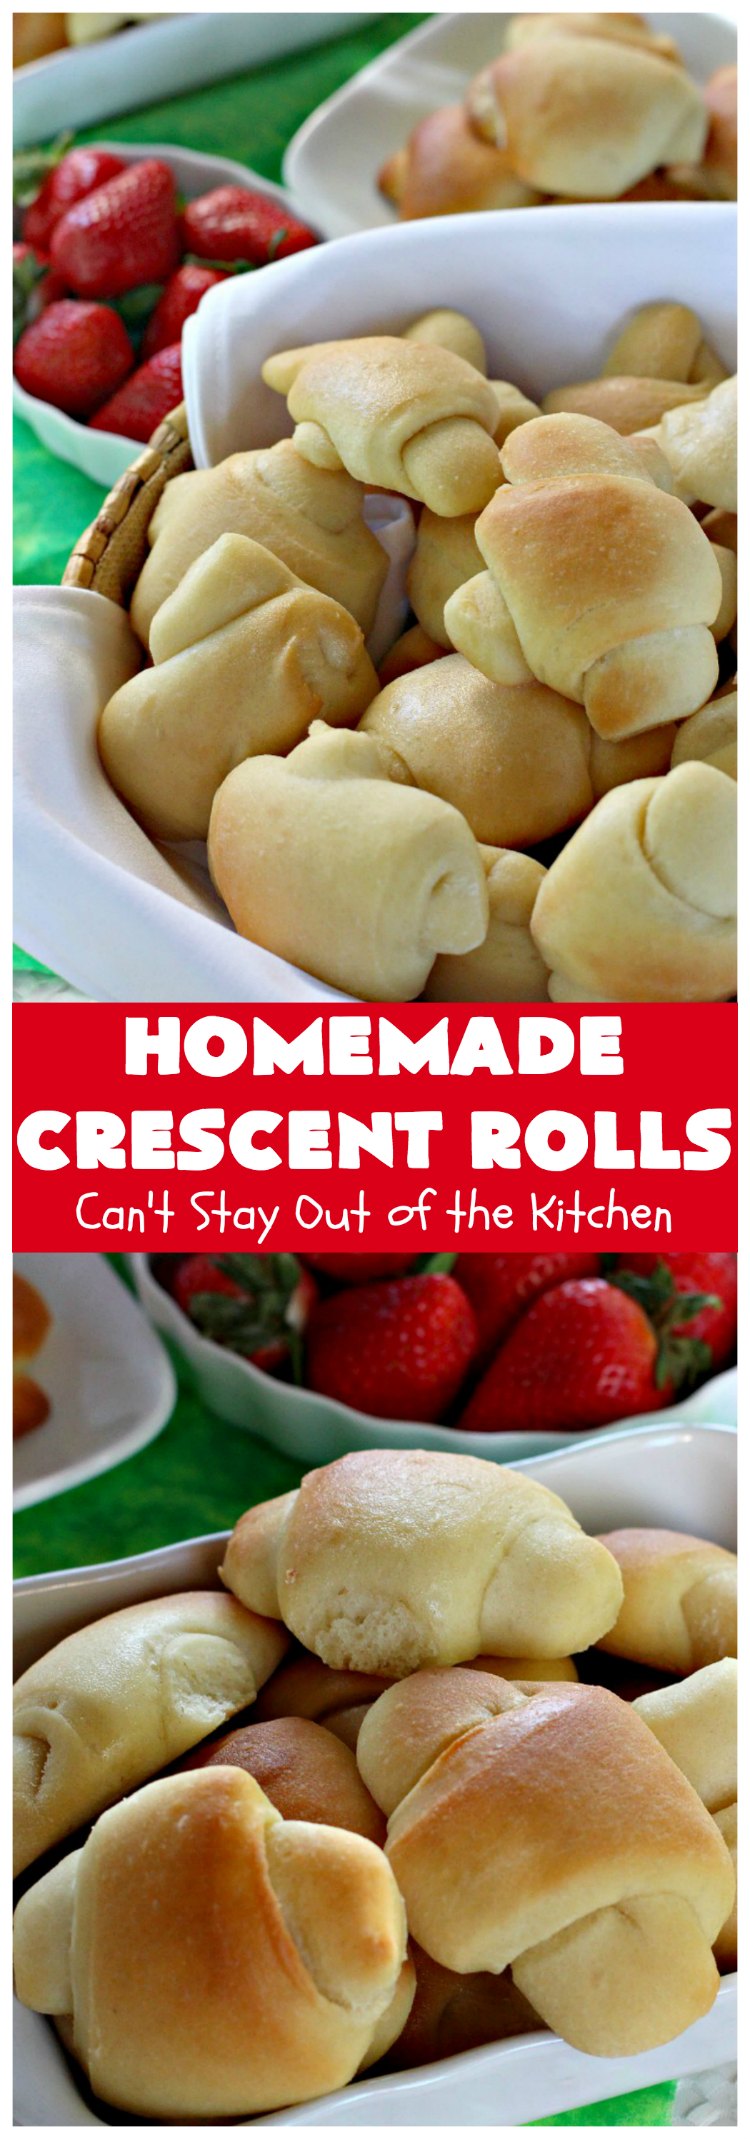 Homemade Crescent Rolls | Can't Stay Out of the Kitchen